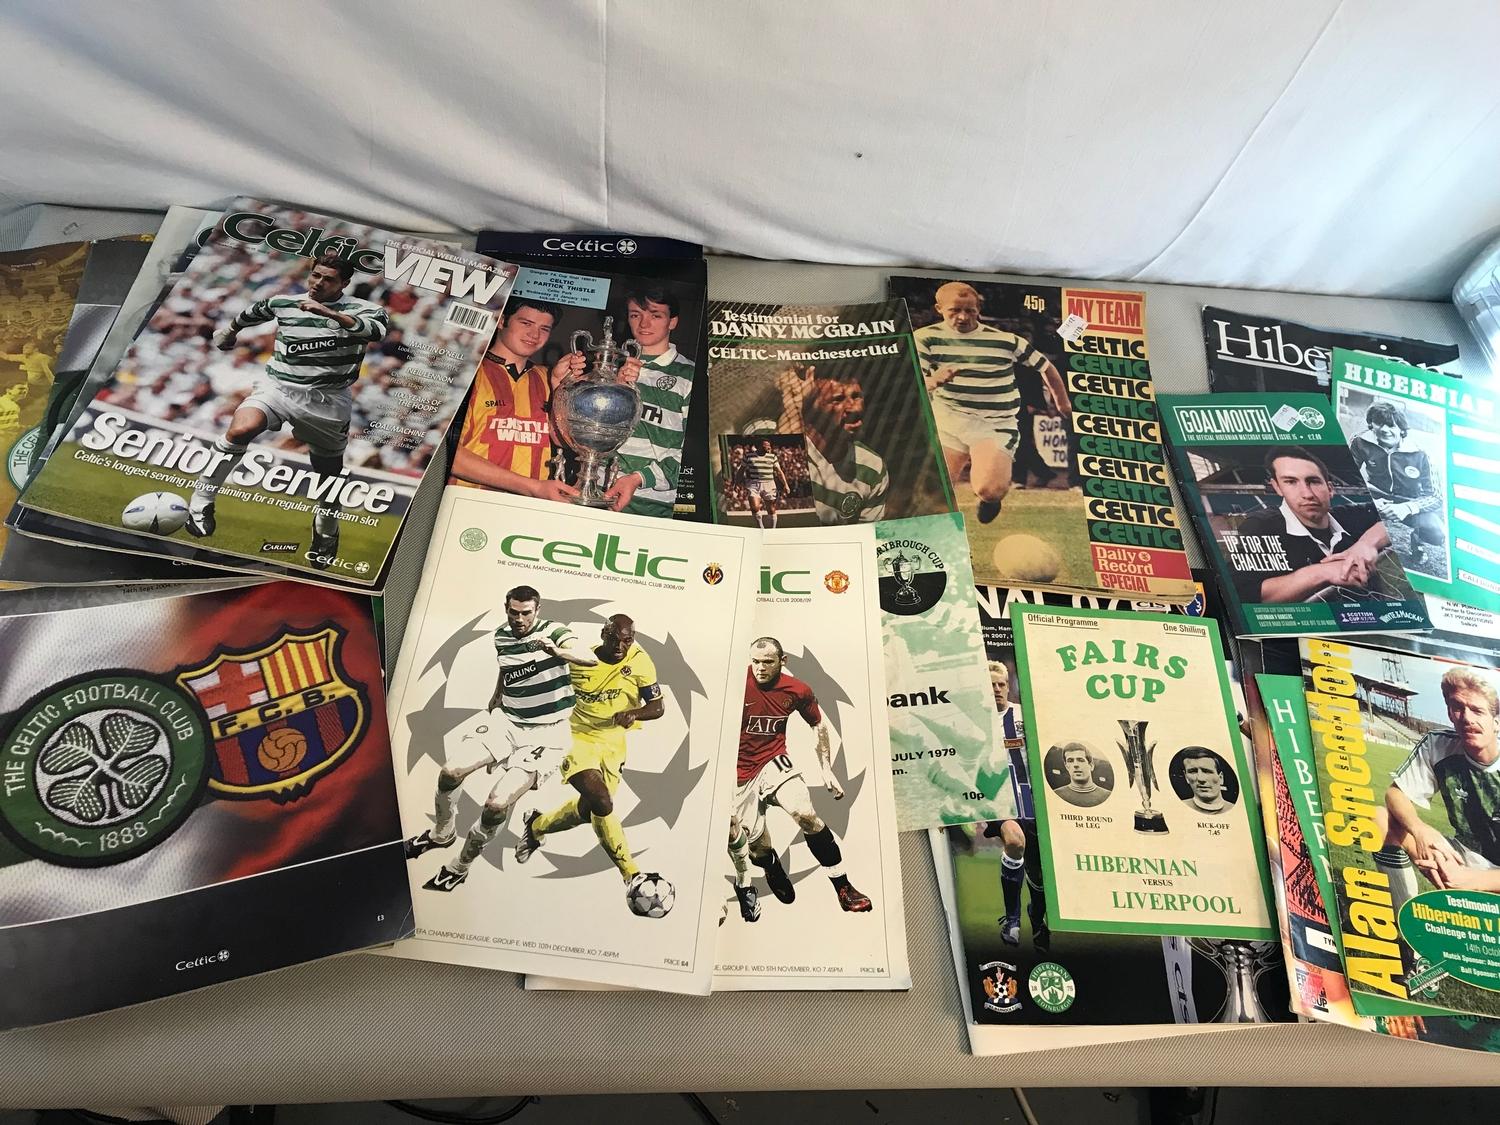 A collection of Hibernian and Celtic football programmes